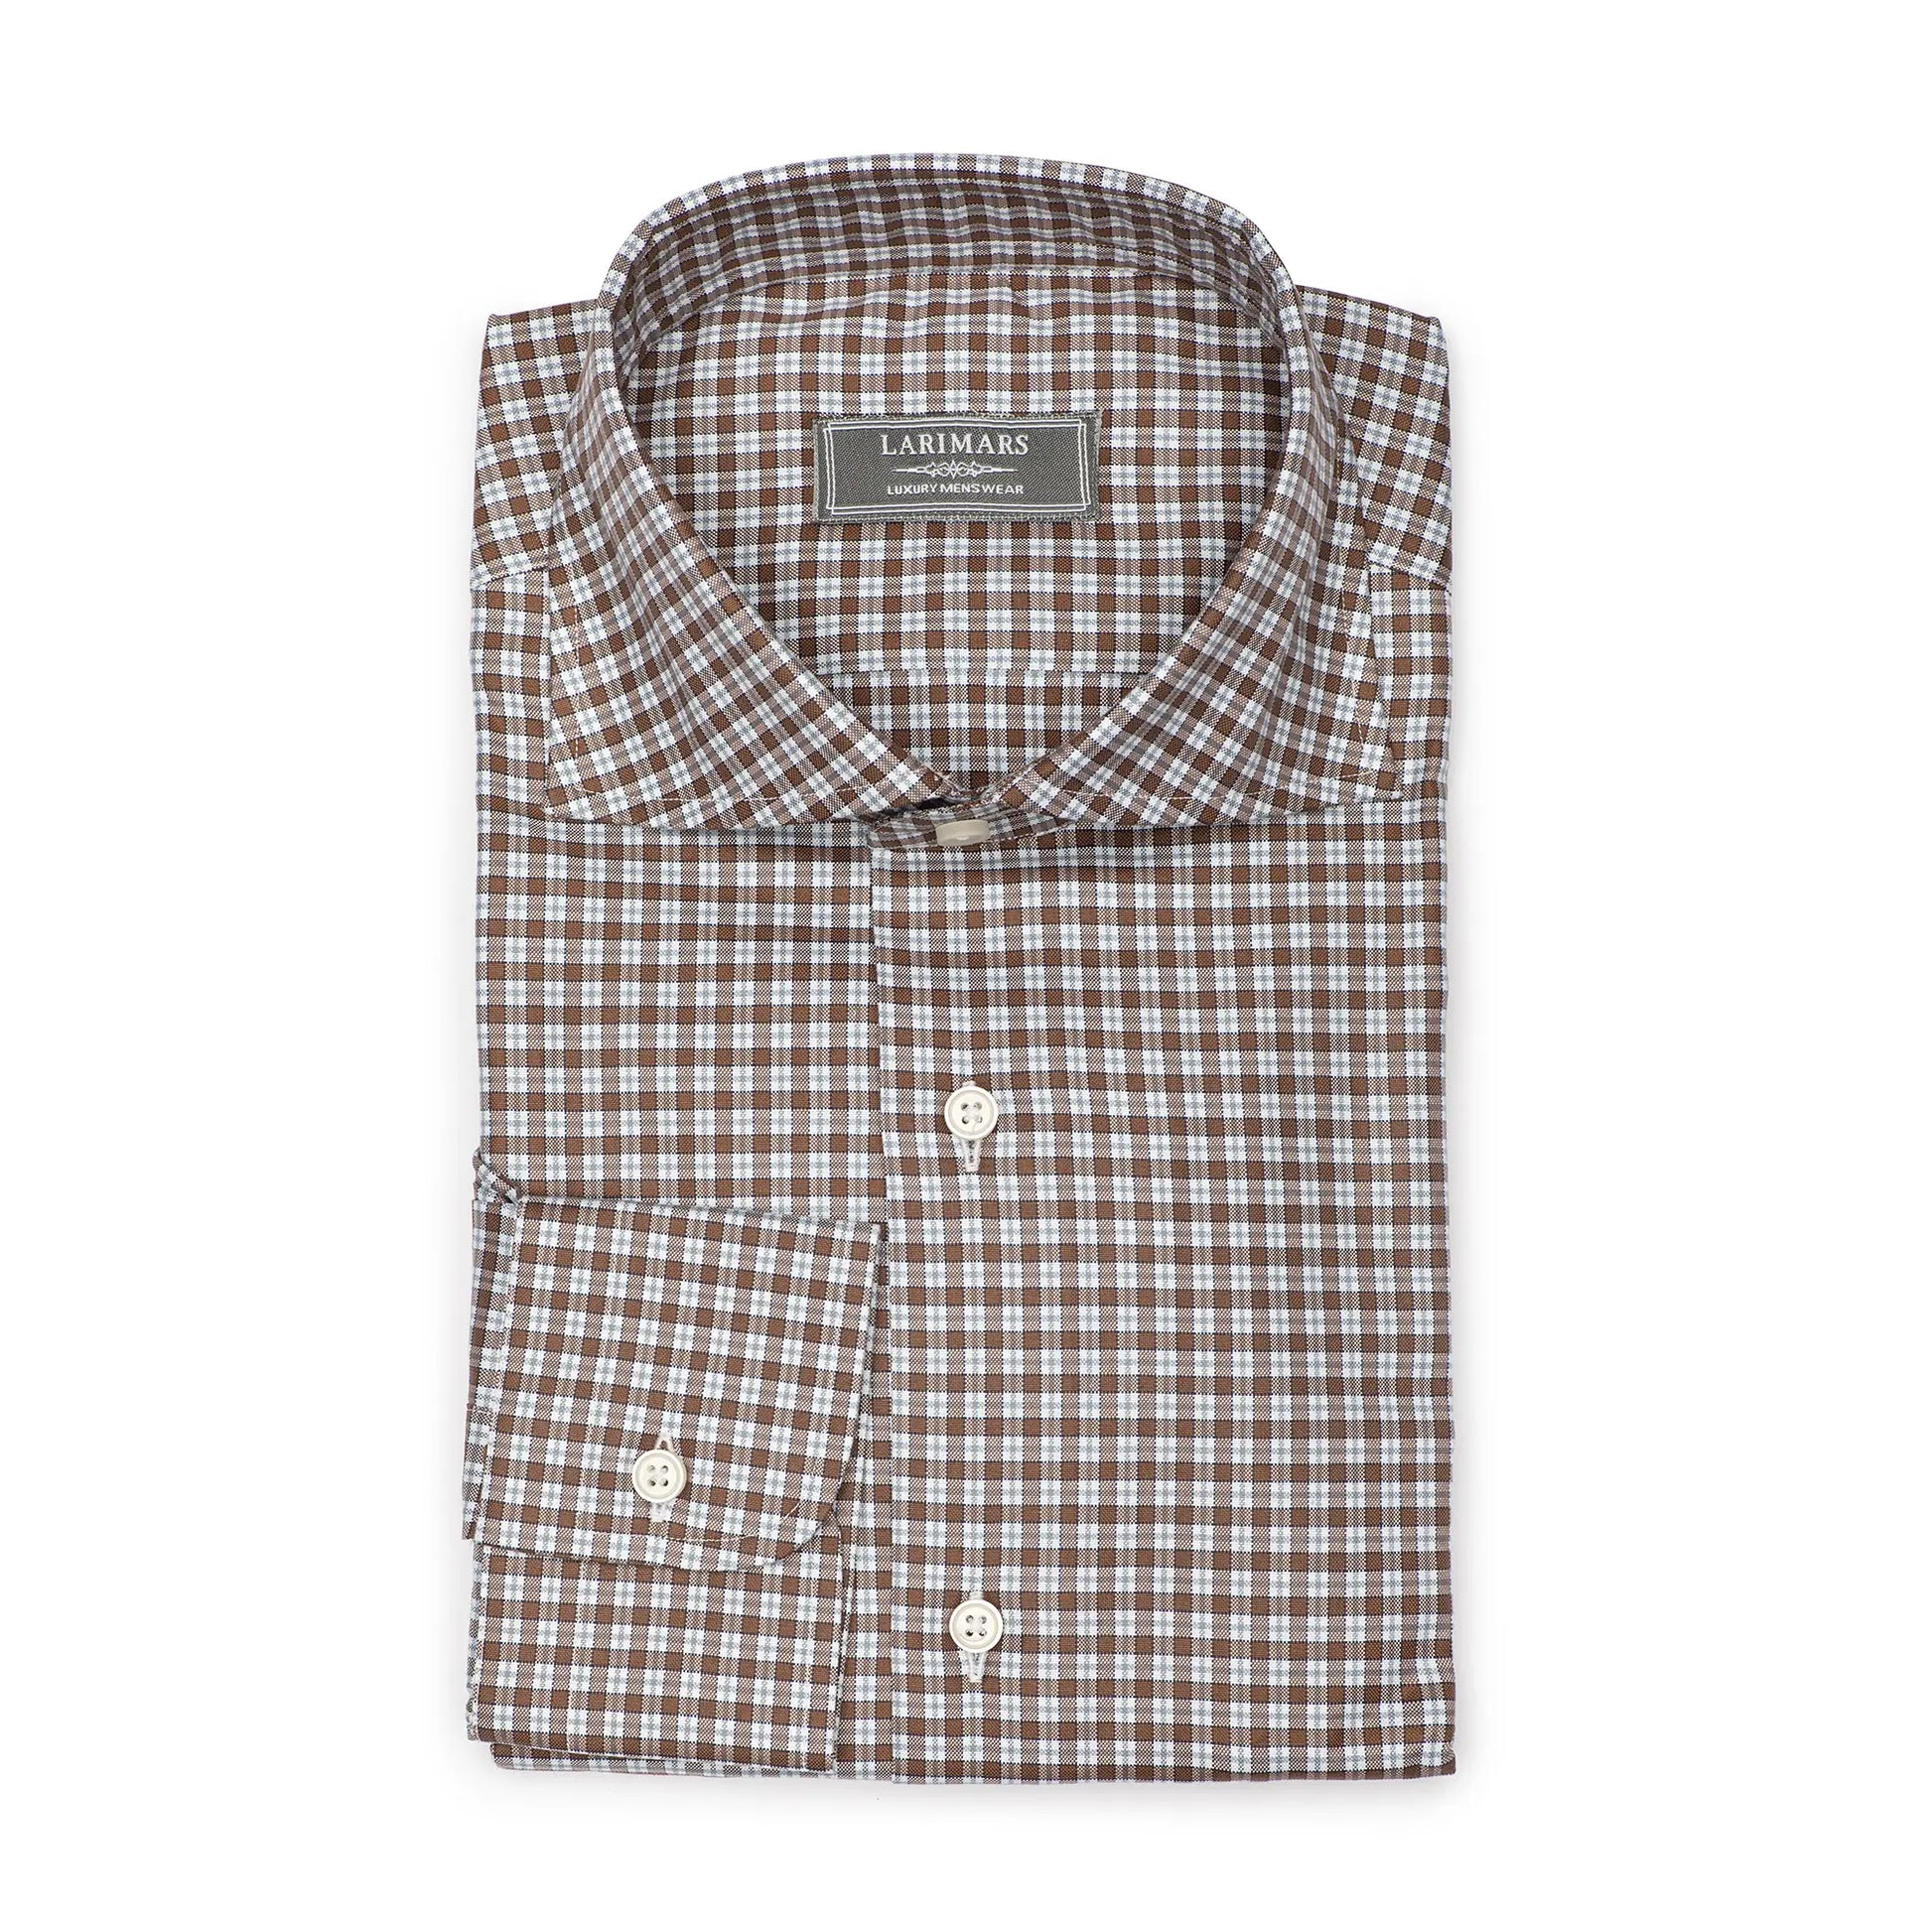 Brown Small Check - Larimars Clothing Men's Formal and casual wear shirts